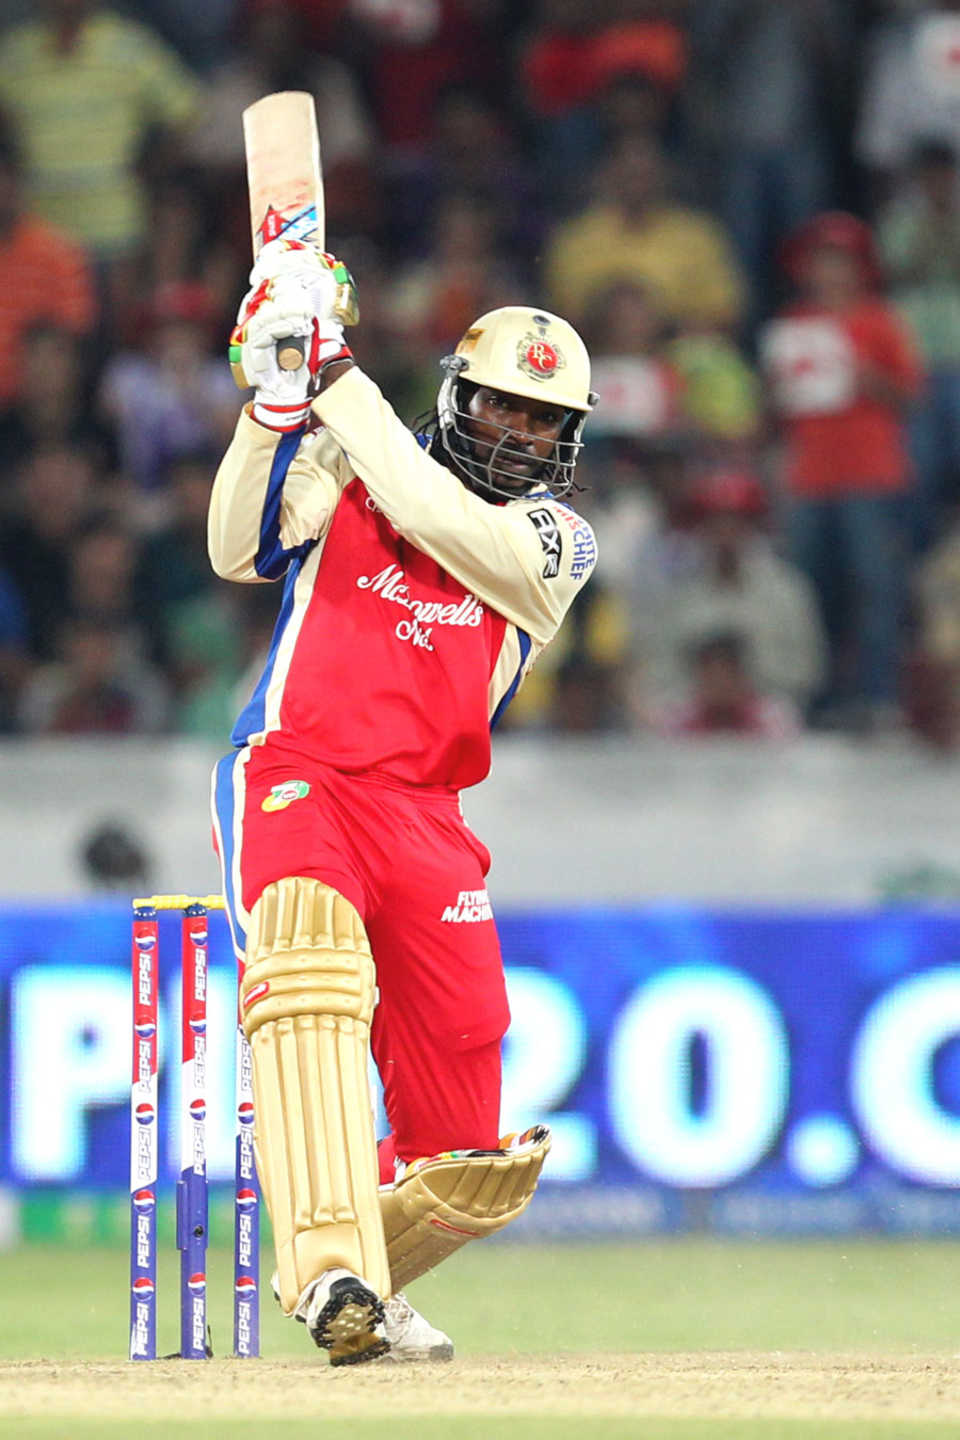 Chris Gayle smashes one down the ground